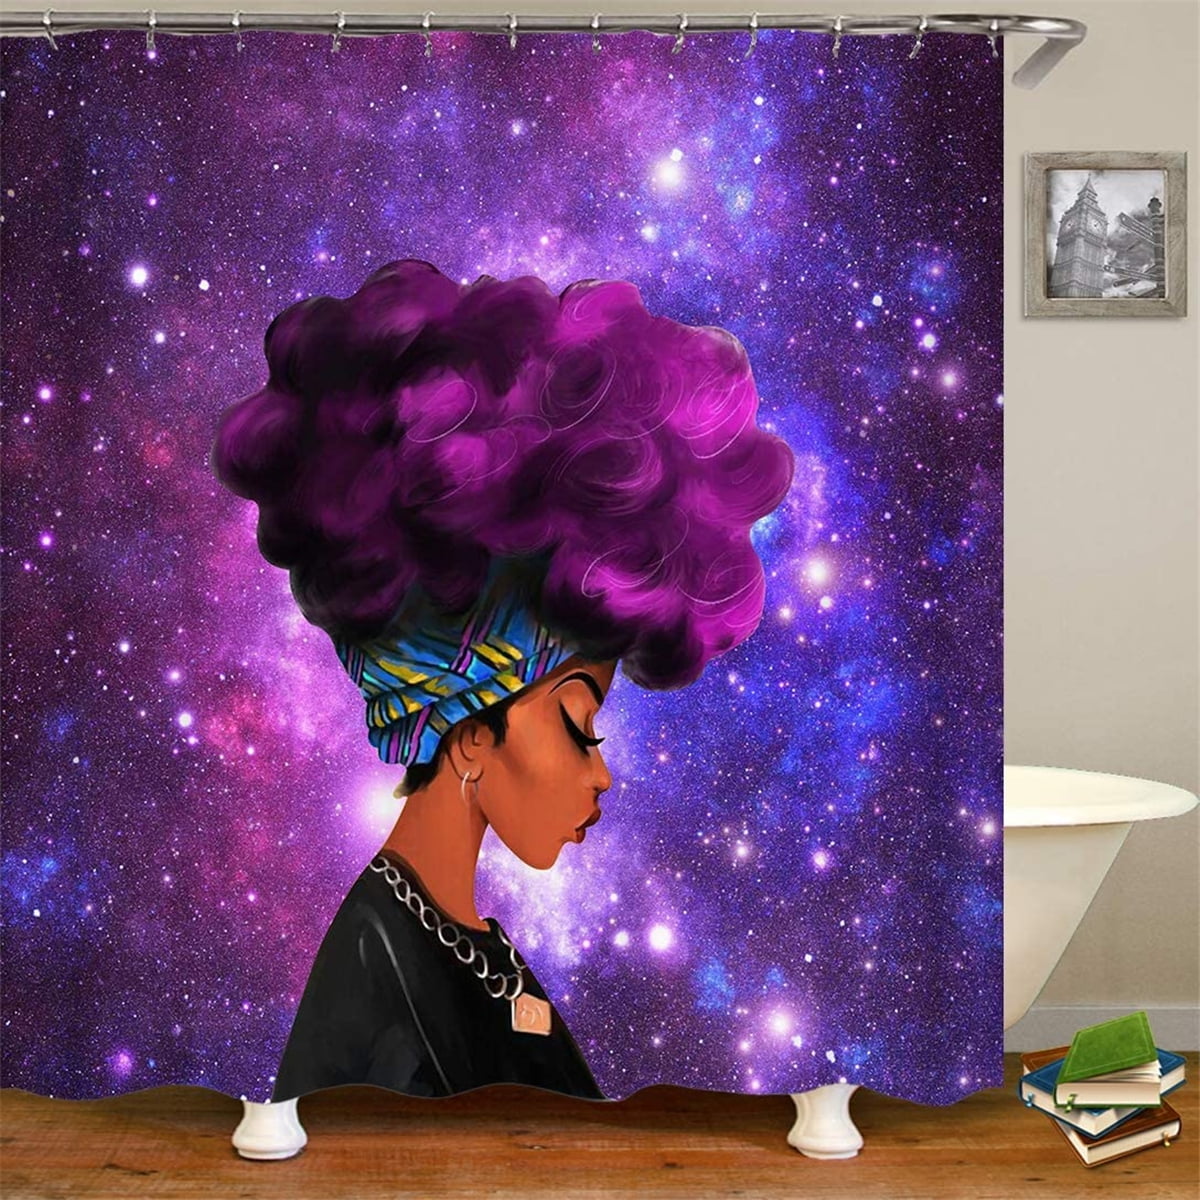 African Women Shower Curtain Black Girl w/ Purple Hair Afro Hairstyle Home Decro 